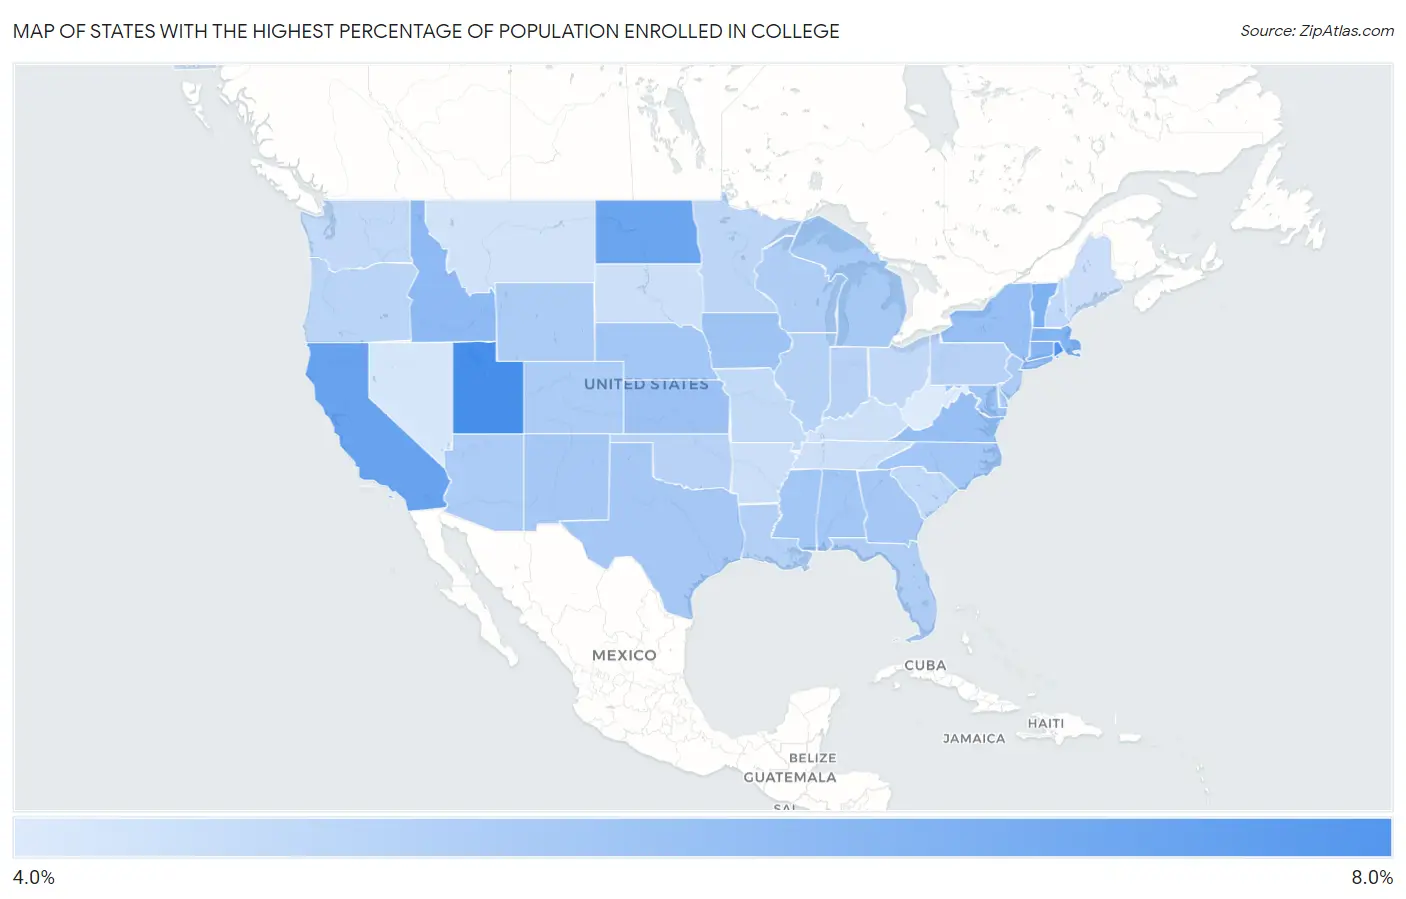 States with the Highest Percentage of Population Enrolled in College in the United States Map